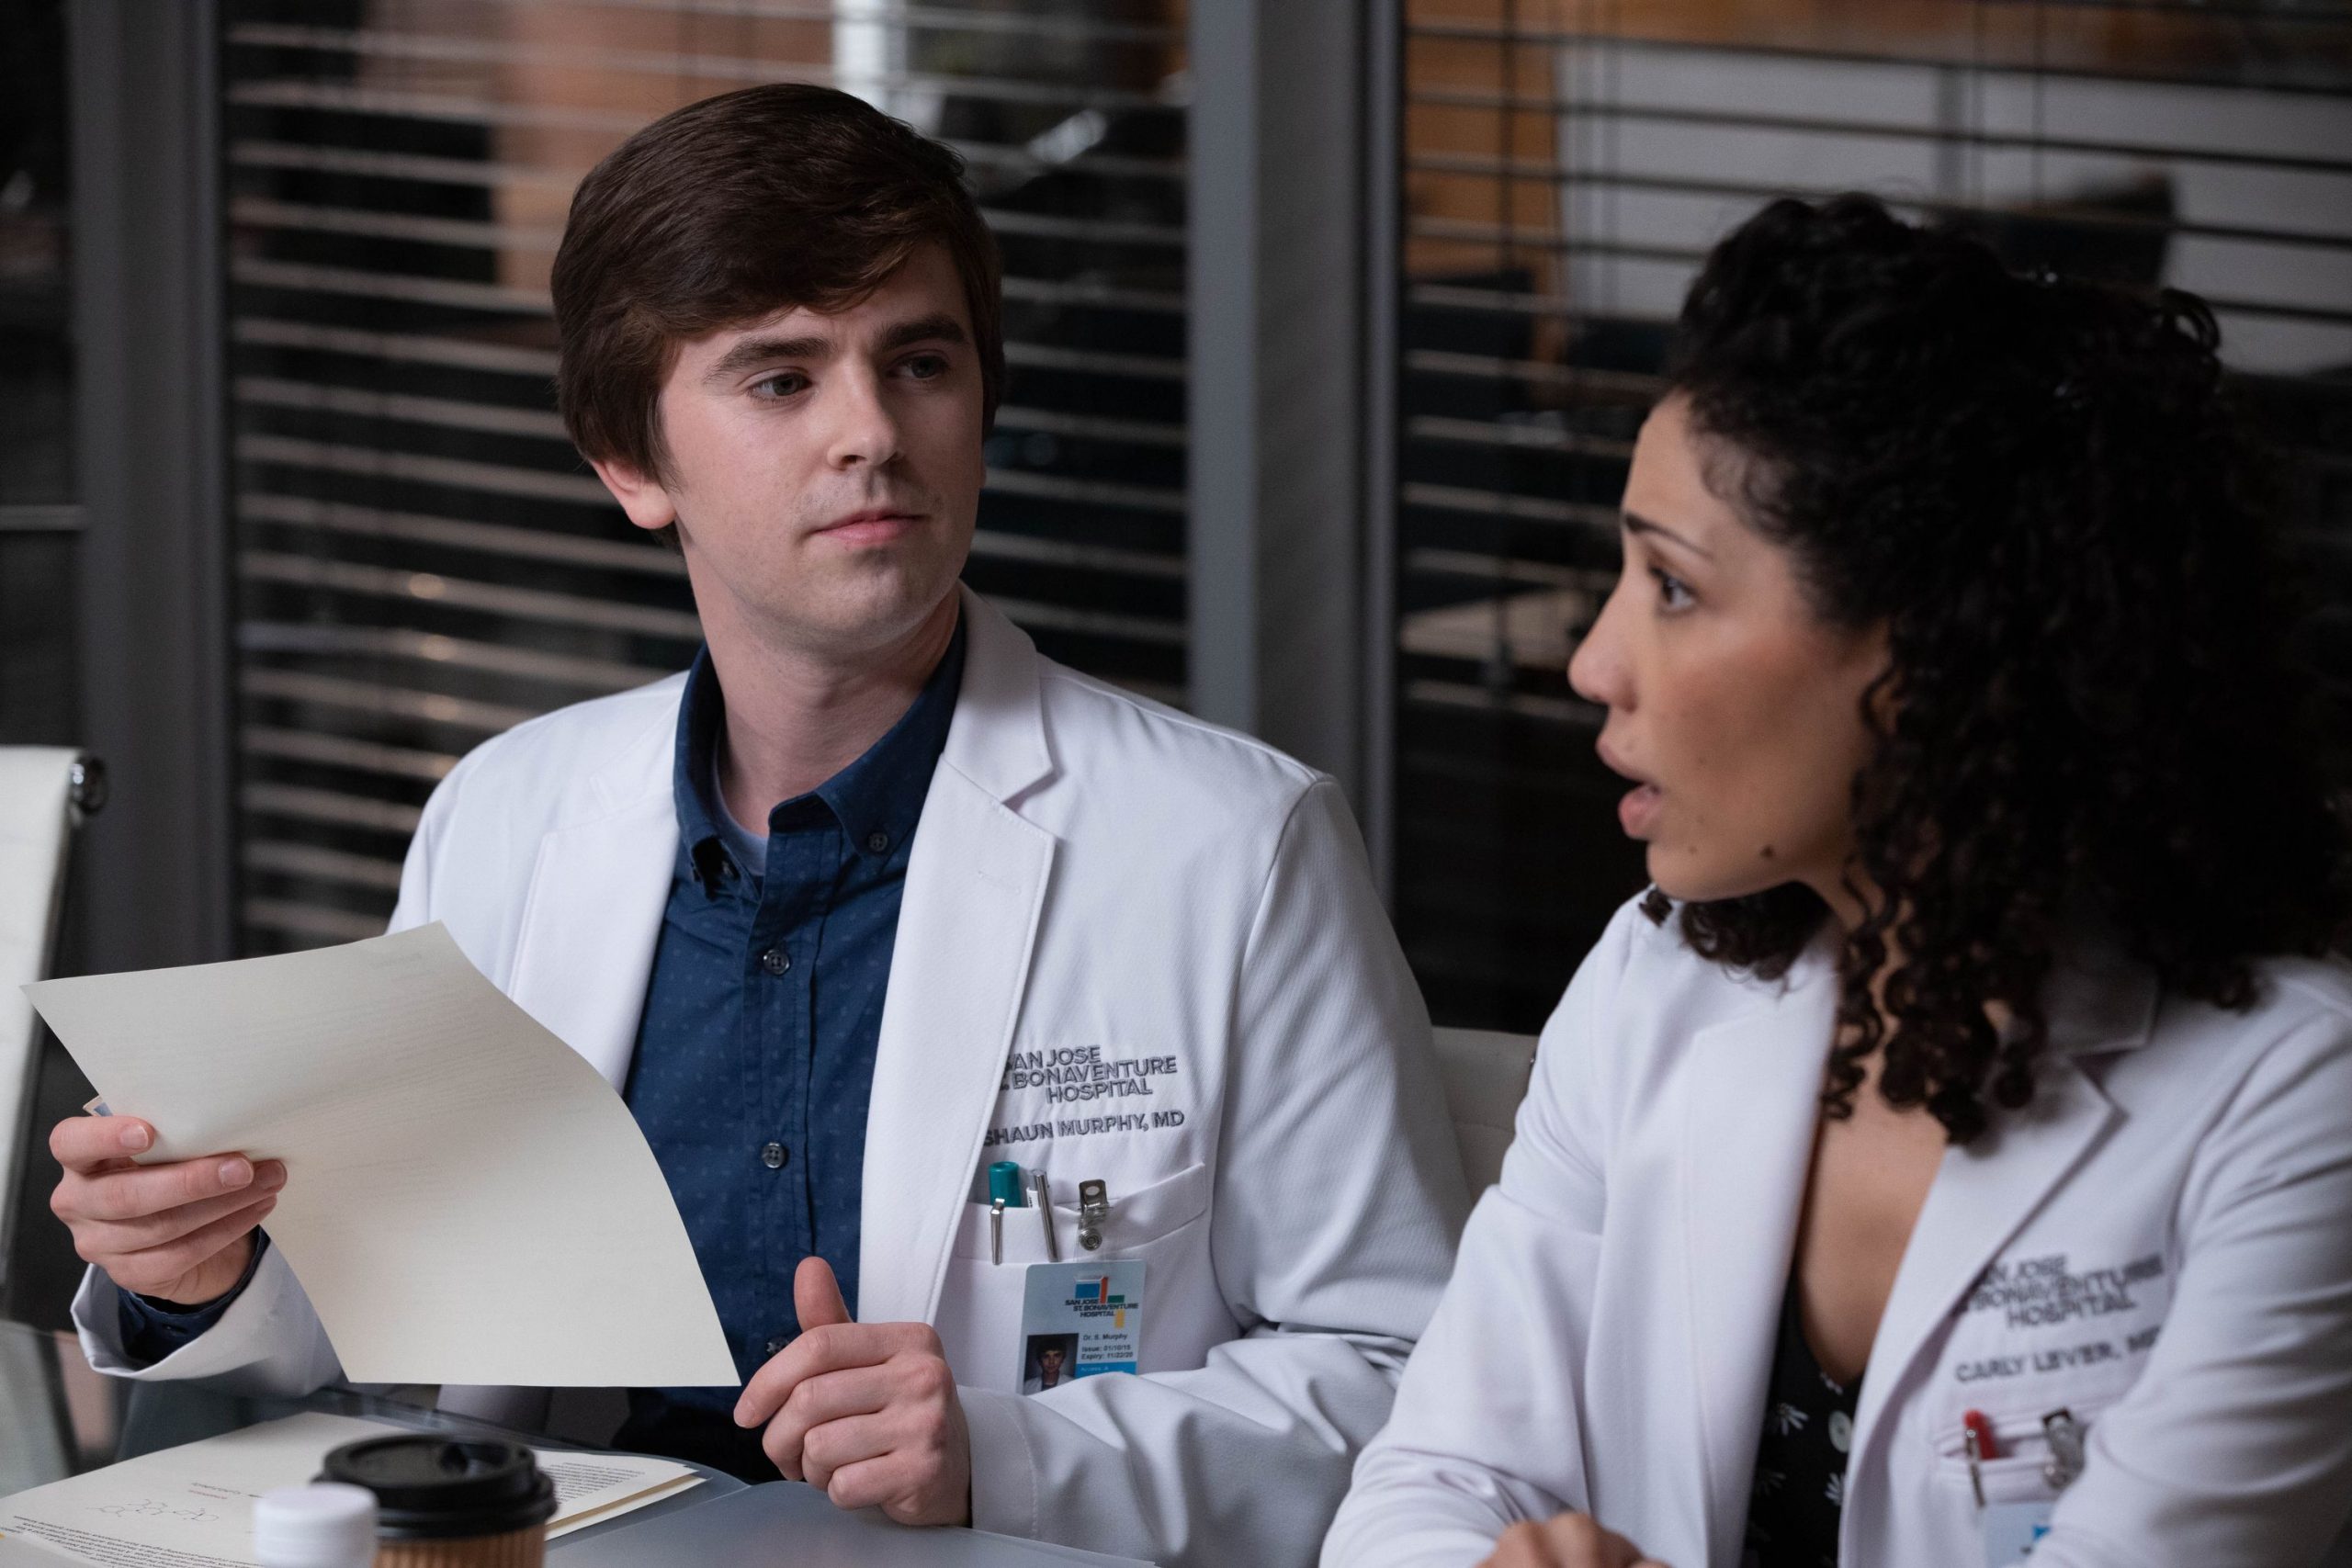 The Good Doctor” Season 5 Where to Watch Online Release Date Time Revealed!